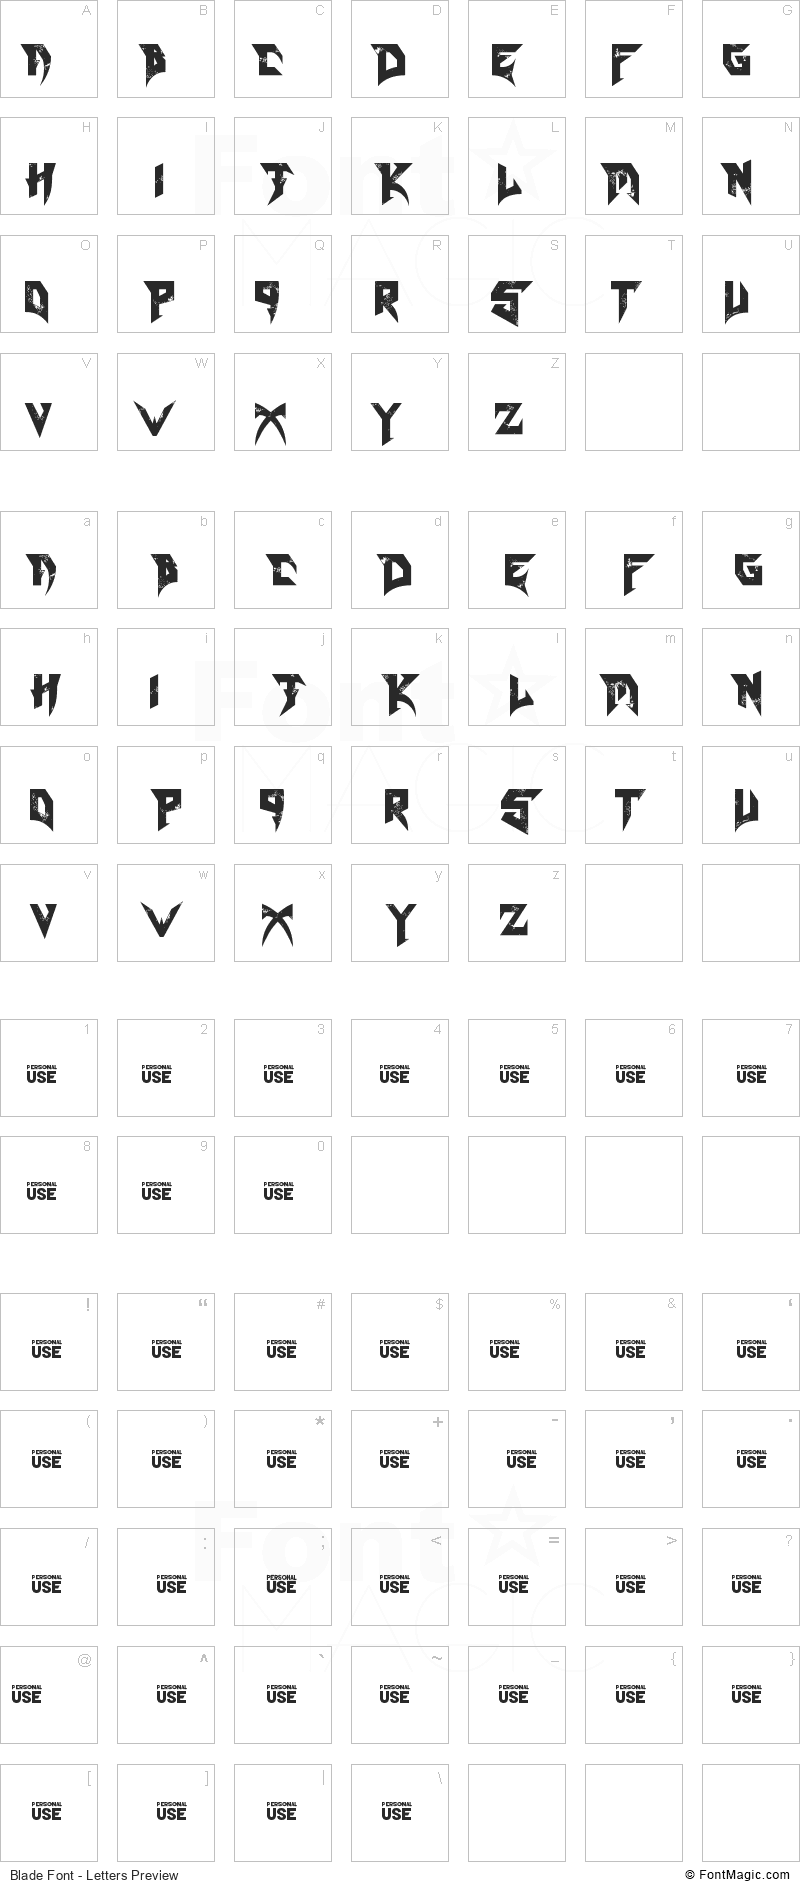 Blade Font - All Latters Preview Chart